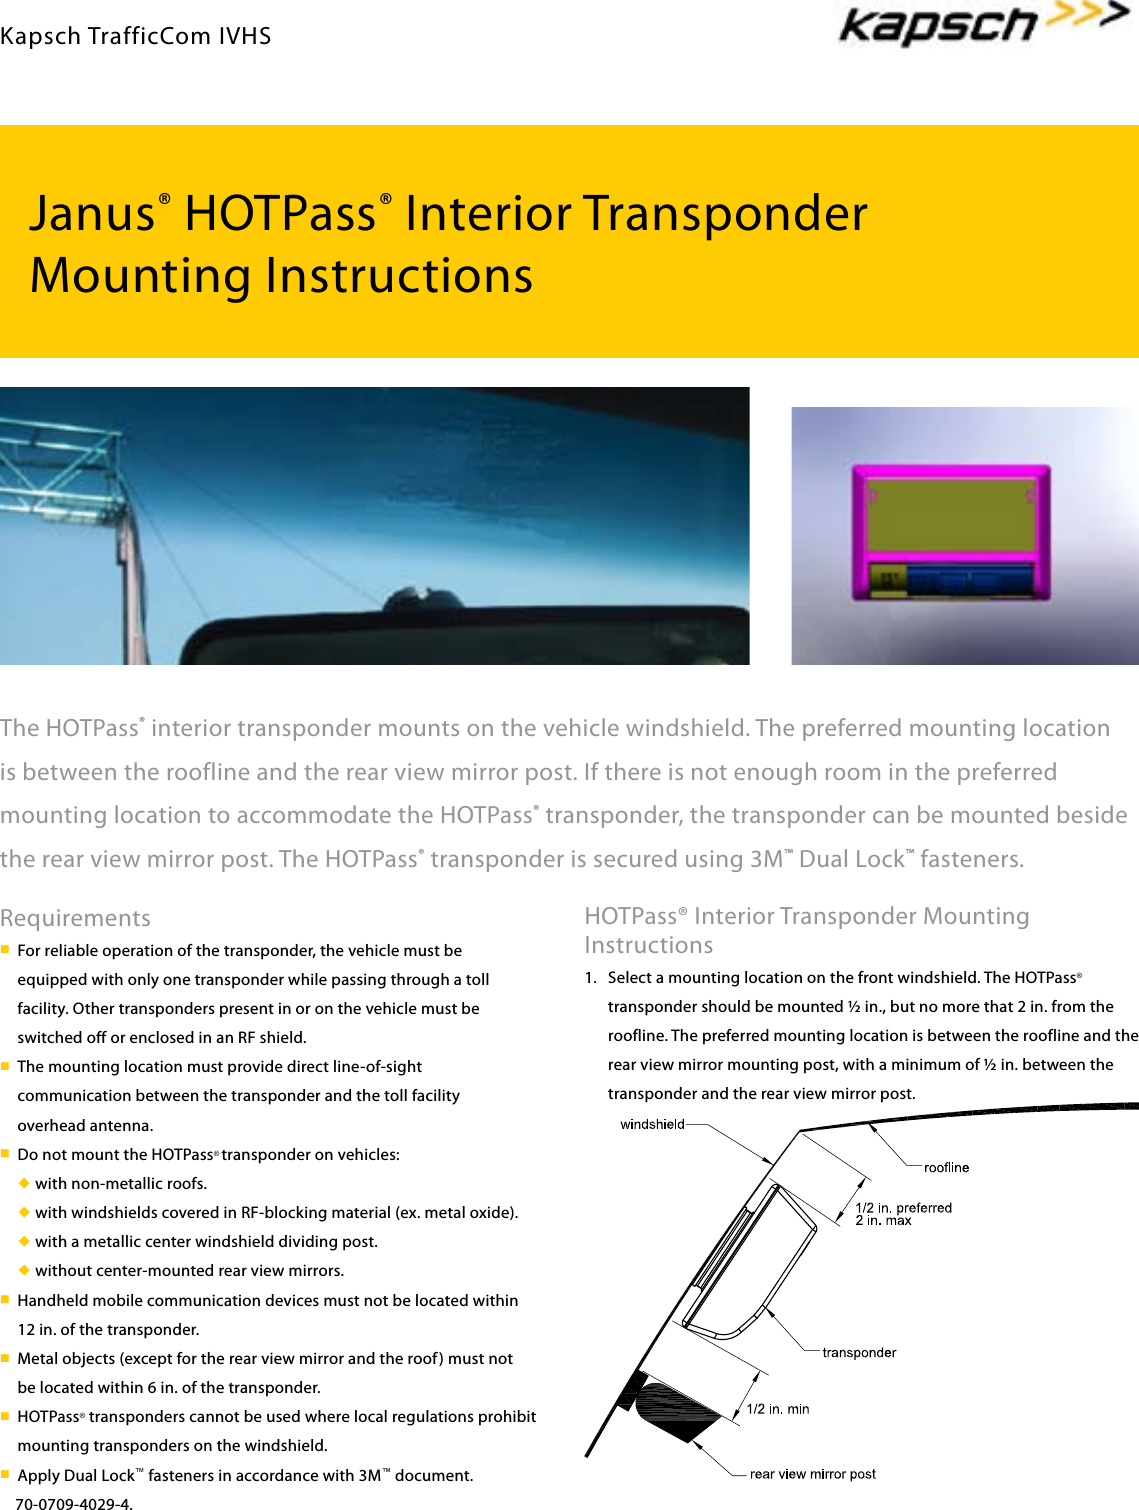 Janus® HOTPass® Interior TransponderMounting InstructionsThe HOTPass® interior transponder mounts on the vehicle windshield. The preferred mounting location is between the roofline and the rear view mirror post. If there is not enough room in the preferred mounting location to accommodate the HOTPass® transponder, the transponder can be mounted beside the rear view mirror post. The HOTPass® transponder is secured using 3M™ Dual Lock™ fasteners.HOTPass® Interior Transponder Mounting Instructions1.  Select a mounting location on the front windshield. The HOTPass® transponder should be mounted � in., but no more that 2 in. from the roofline. The preferred mounting location is between the roofline and the rear view mirror mounting post, with a minimum of � in. between the transponder and the rear view mirror post.Requirementsn For reliable operation of the transponder, the vehicle must be equipped with only one transponder while passing through a toll facility. Other transponders present in or on the vehicle must be switched off or enclosed in an RF shield.n The mounting location must provide direct line-of-sight communication between the transponder and the toll facility overhead antenna.n Do not mount the HOTPass® transponder on vehicles:u with non-metallic roofs. u with windshields covered in RF-blocking material (ex. metal oxide). u with a metallic center windshield dividing post. u without center-mounted rear view mirrors.n Handheld mobile communication devices must not be located within 12 in. of the transponder.n Metal objects (except for the rear view mirror and the roof) must not be located within 6 in. of the transponder.n HOTPass® transponders cannot be used where local regulations prohibit mounting transponders on the windshield.n Apply Dual Lock™ fasteners in accordance with 3M™ document.    70-0709-4029-4.Kapsch TrafficCom IVHS